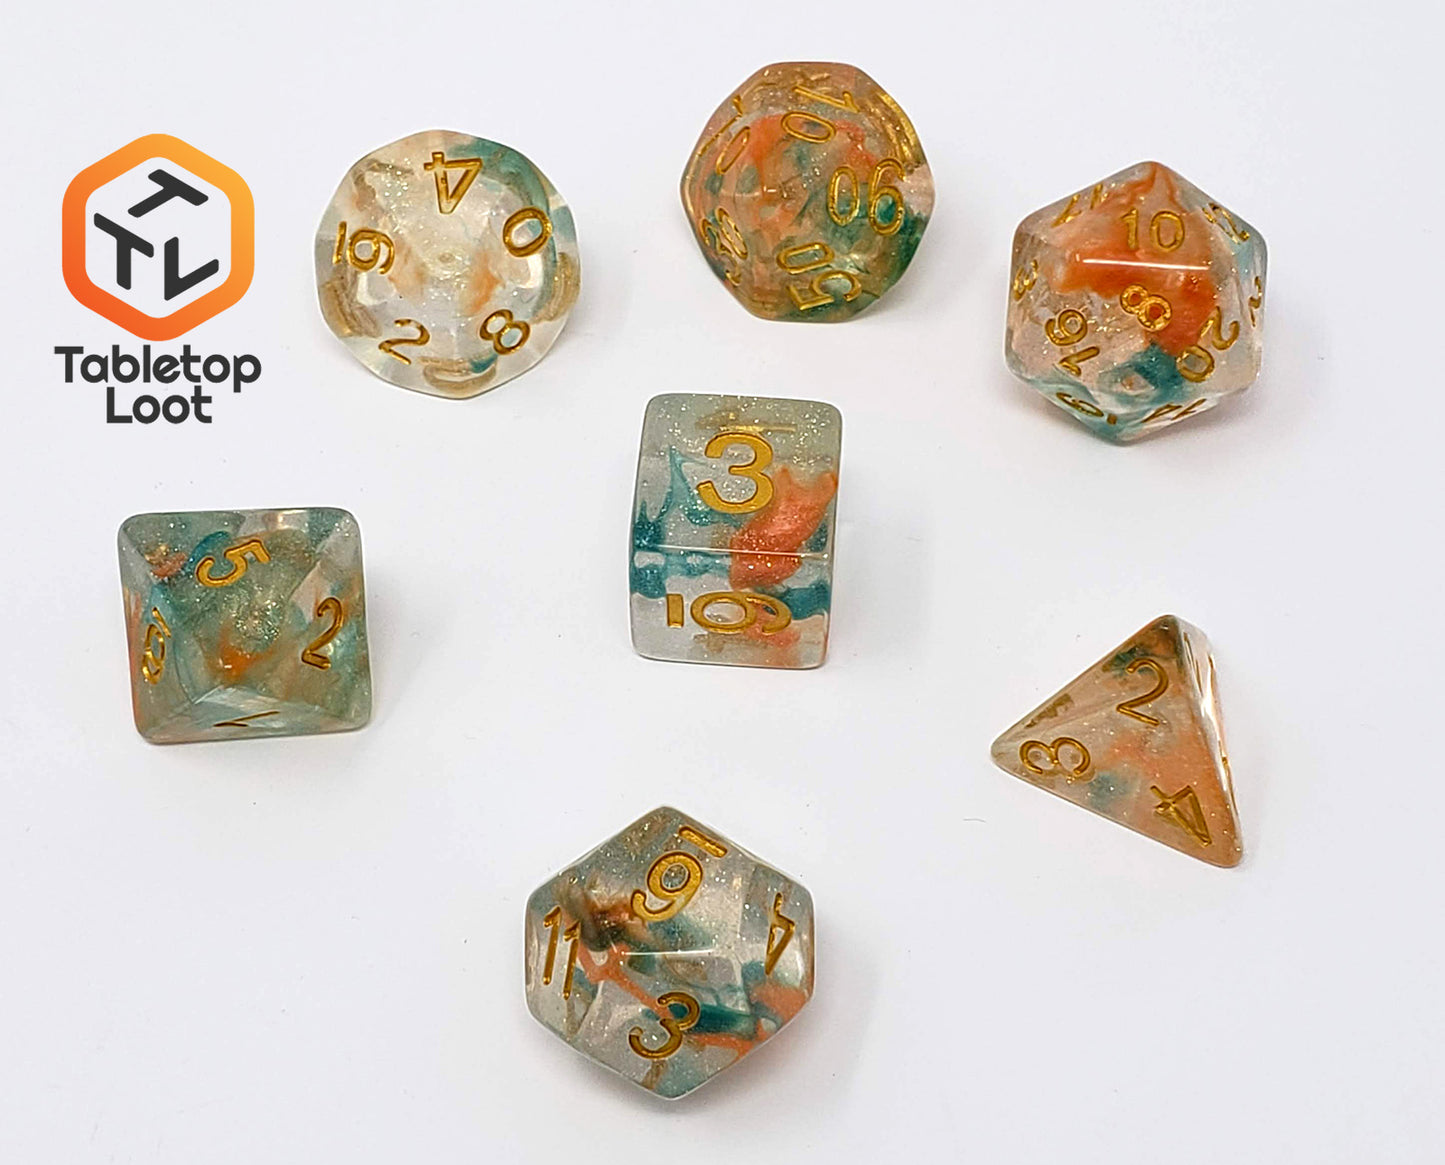 The Luminous Koi 7 piece dice set from Tabletop Loot with swirls of orange and blue in a clear glittery resin with gold numbering.